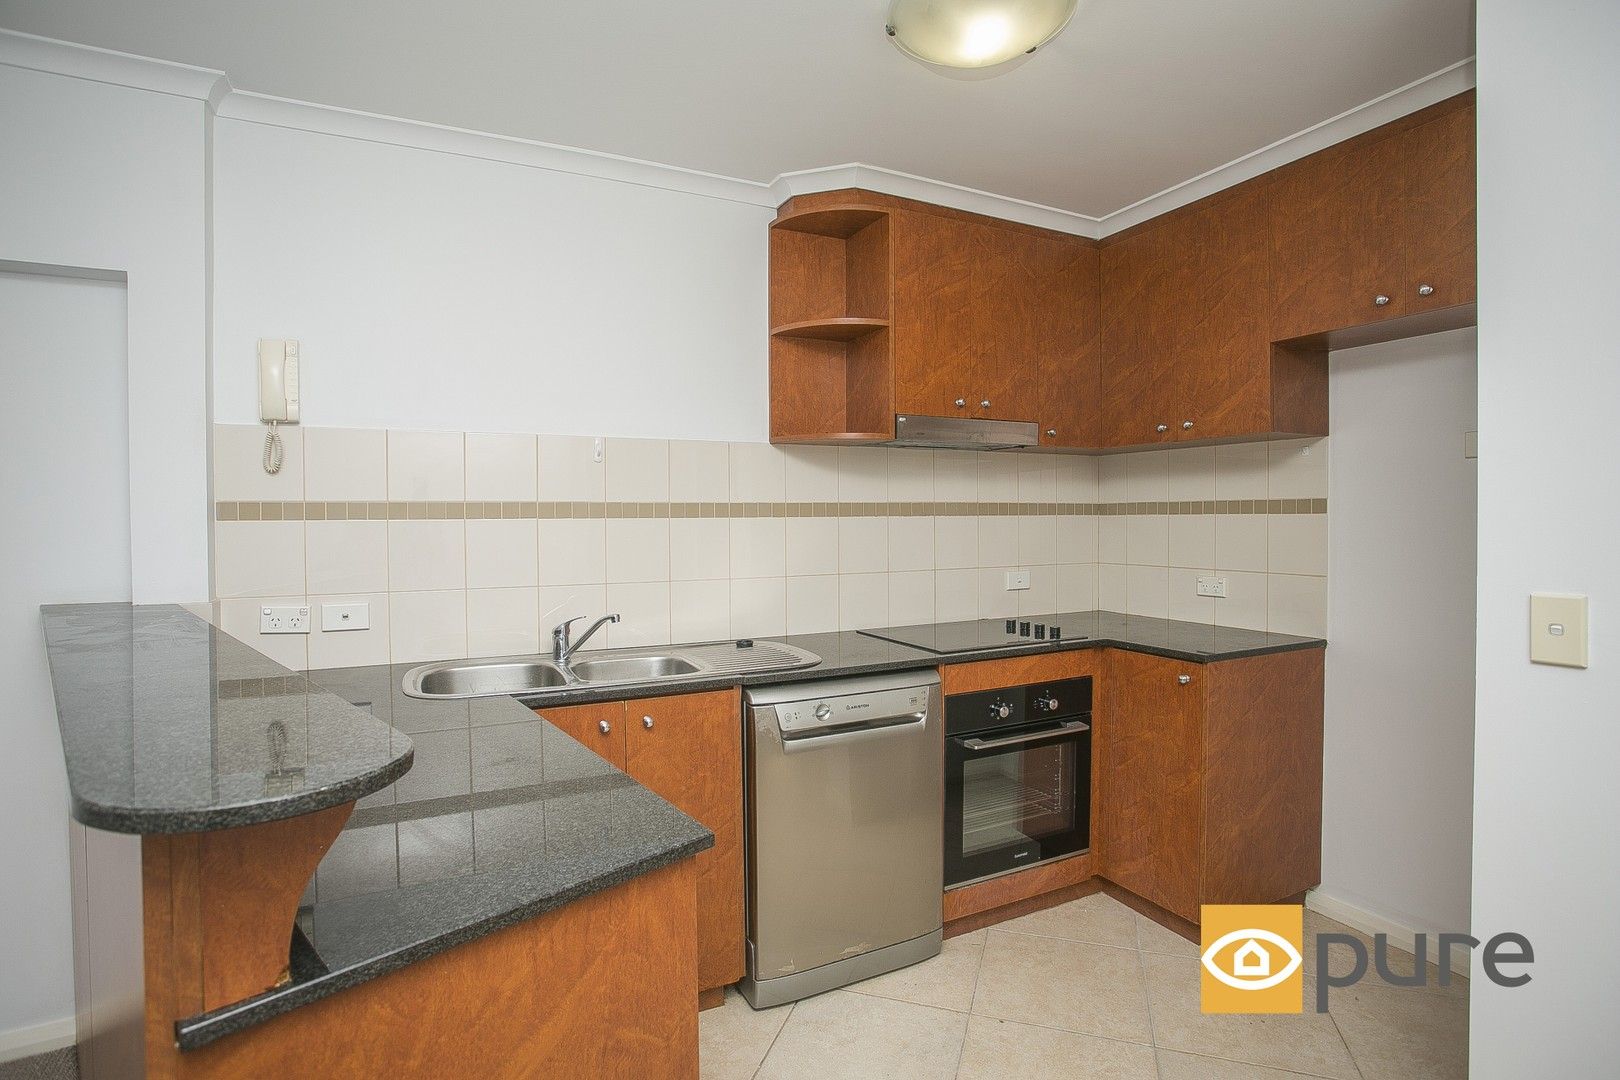 2 bedrooms Apartment / Unit / Flat in 14/2 Outram Street WEST PERTH WA, 6005